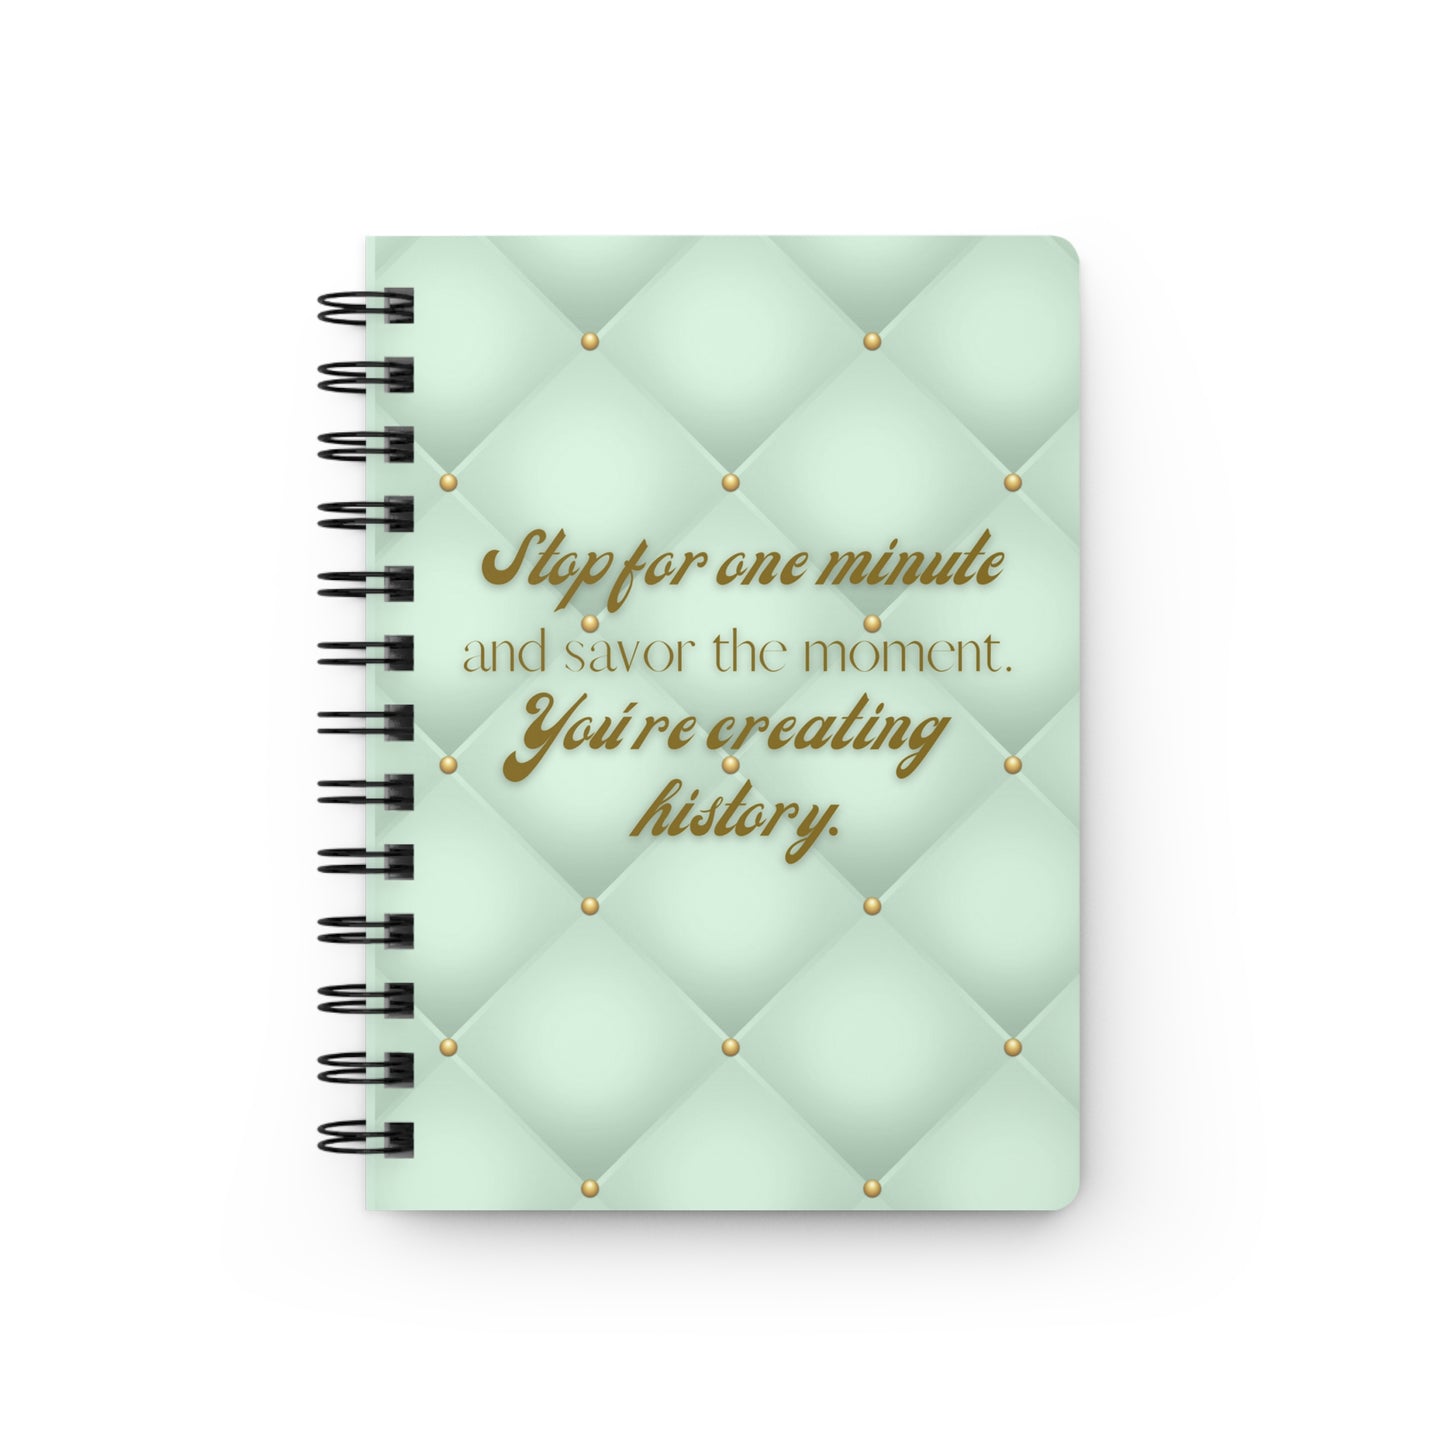 Stop for one minute Tufted Print Cyan Lime Green and Gold Spiral Bound Journal